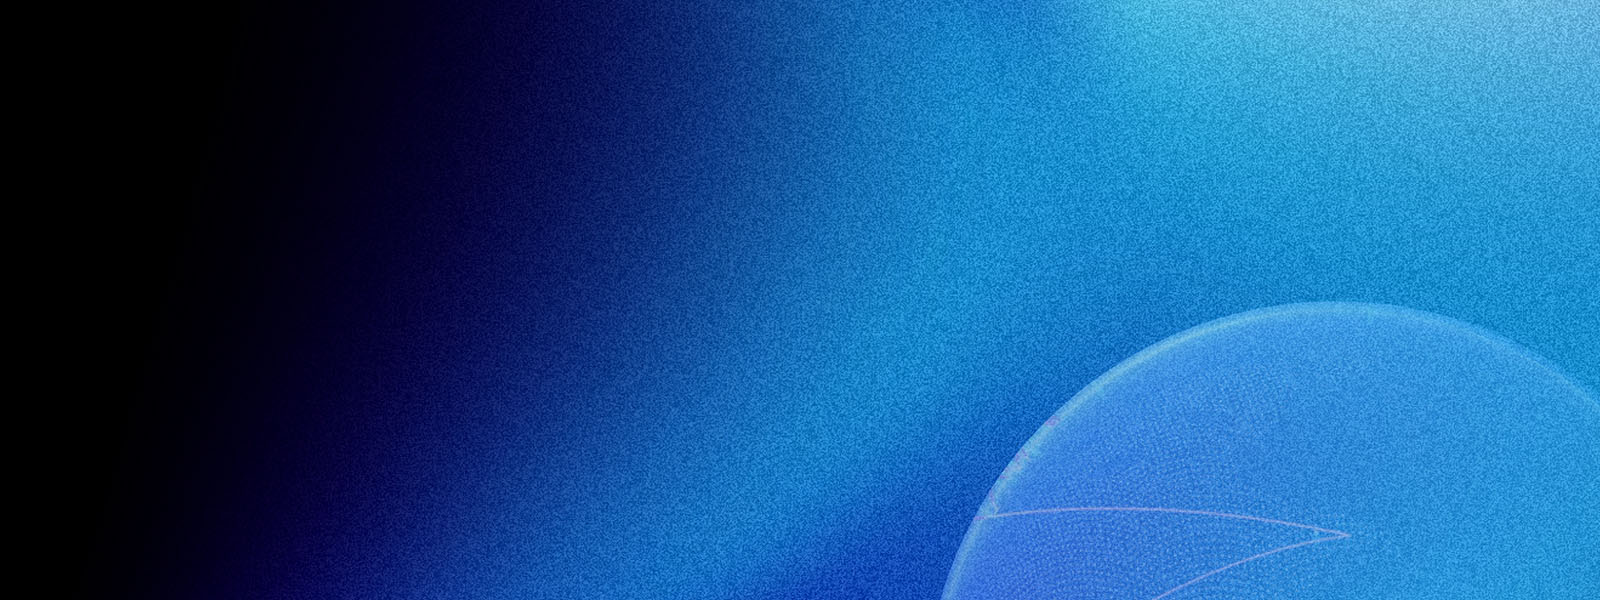 Developer Experience Lab - blue and black abstract background